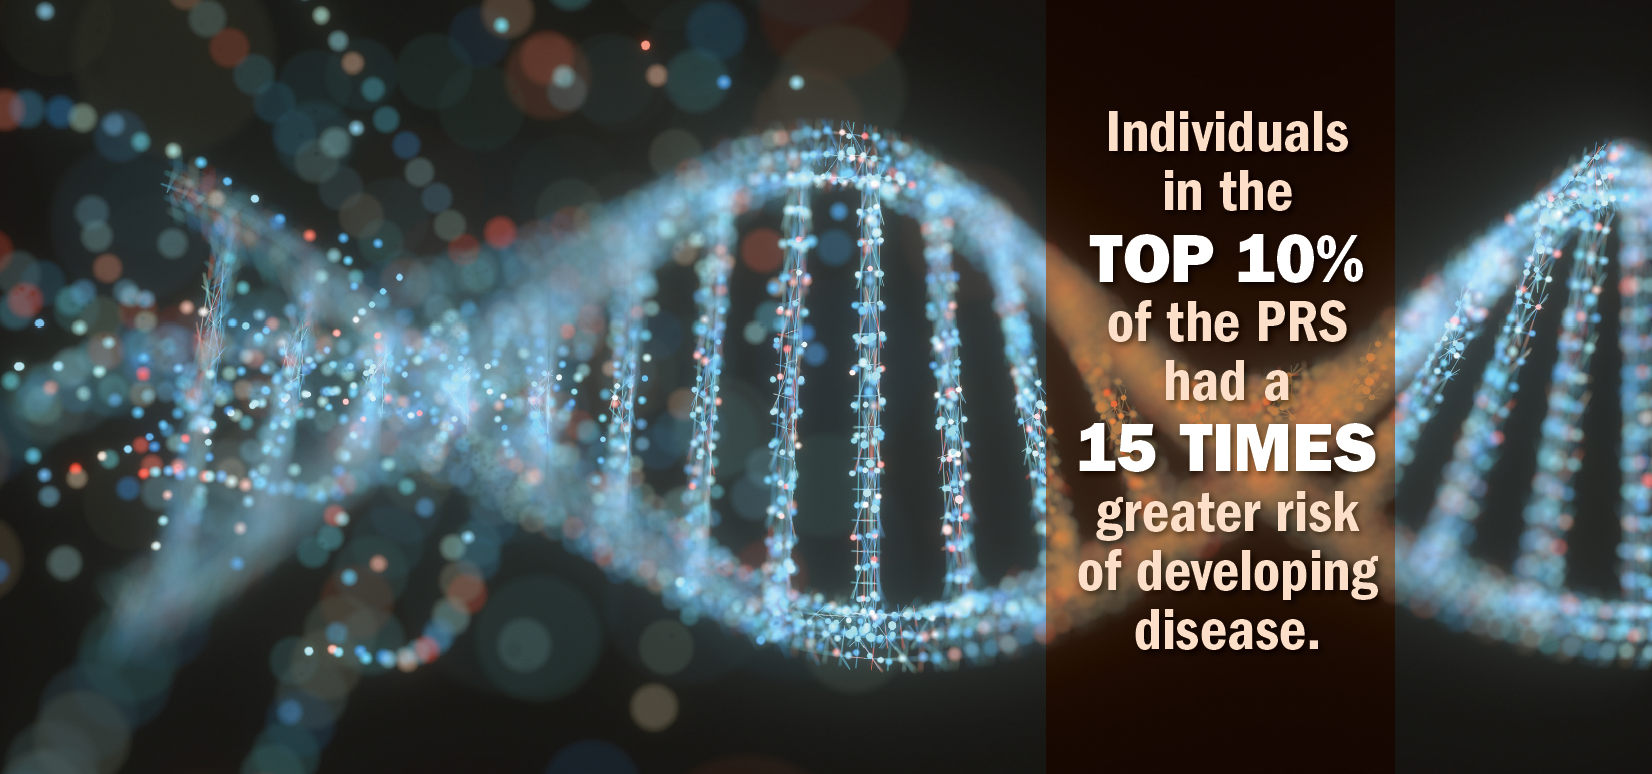 Inidividuals in the top 10% of the PRS had a 15 times greater risk of developing disease.